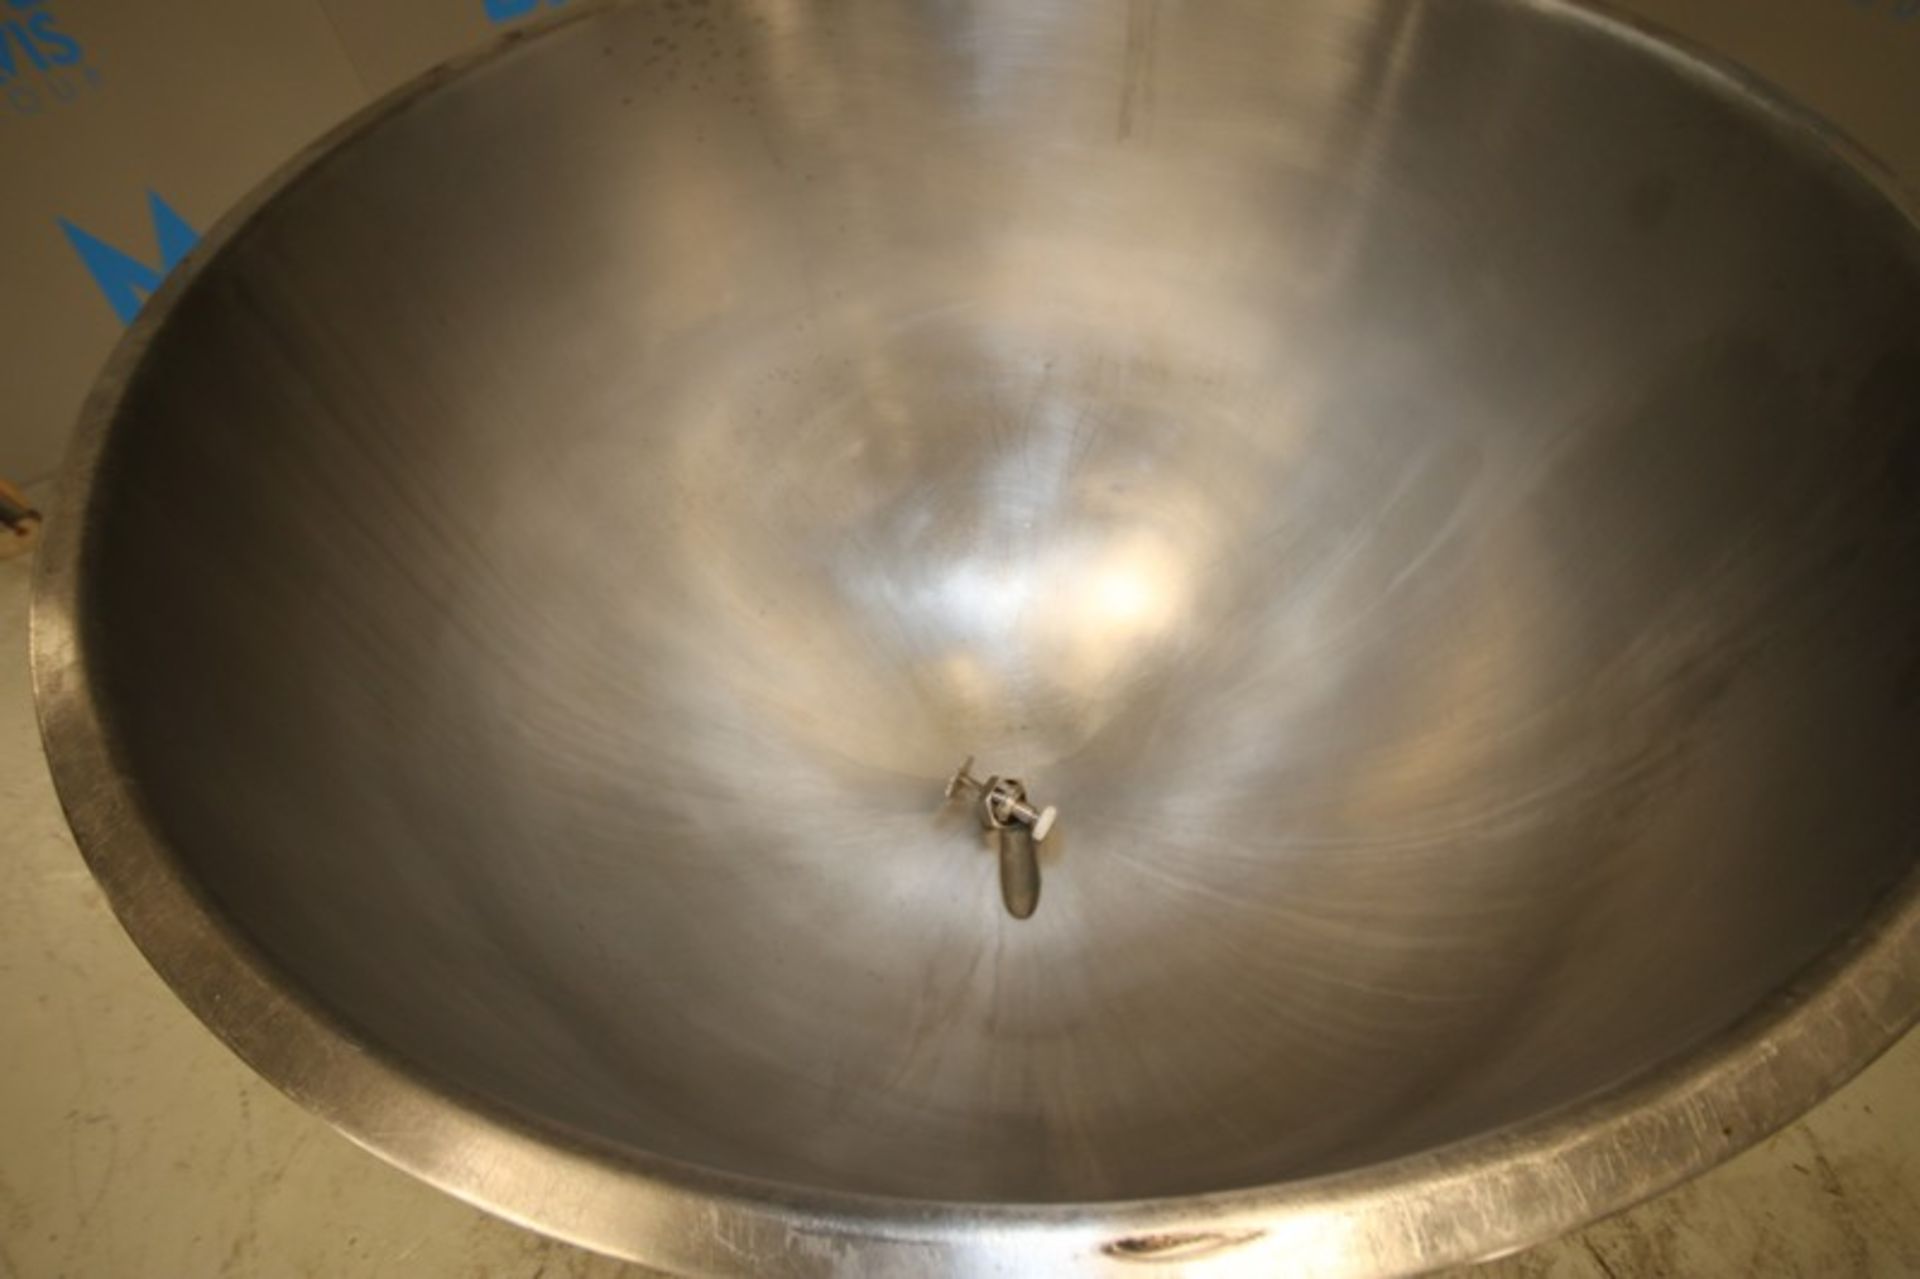 2012 Groen 150 Gallon S/S Jacketed Kettle, Model 150D, SN 75696-1-2, with Hinged Lid, 2" Threaded - Image 2 of 8